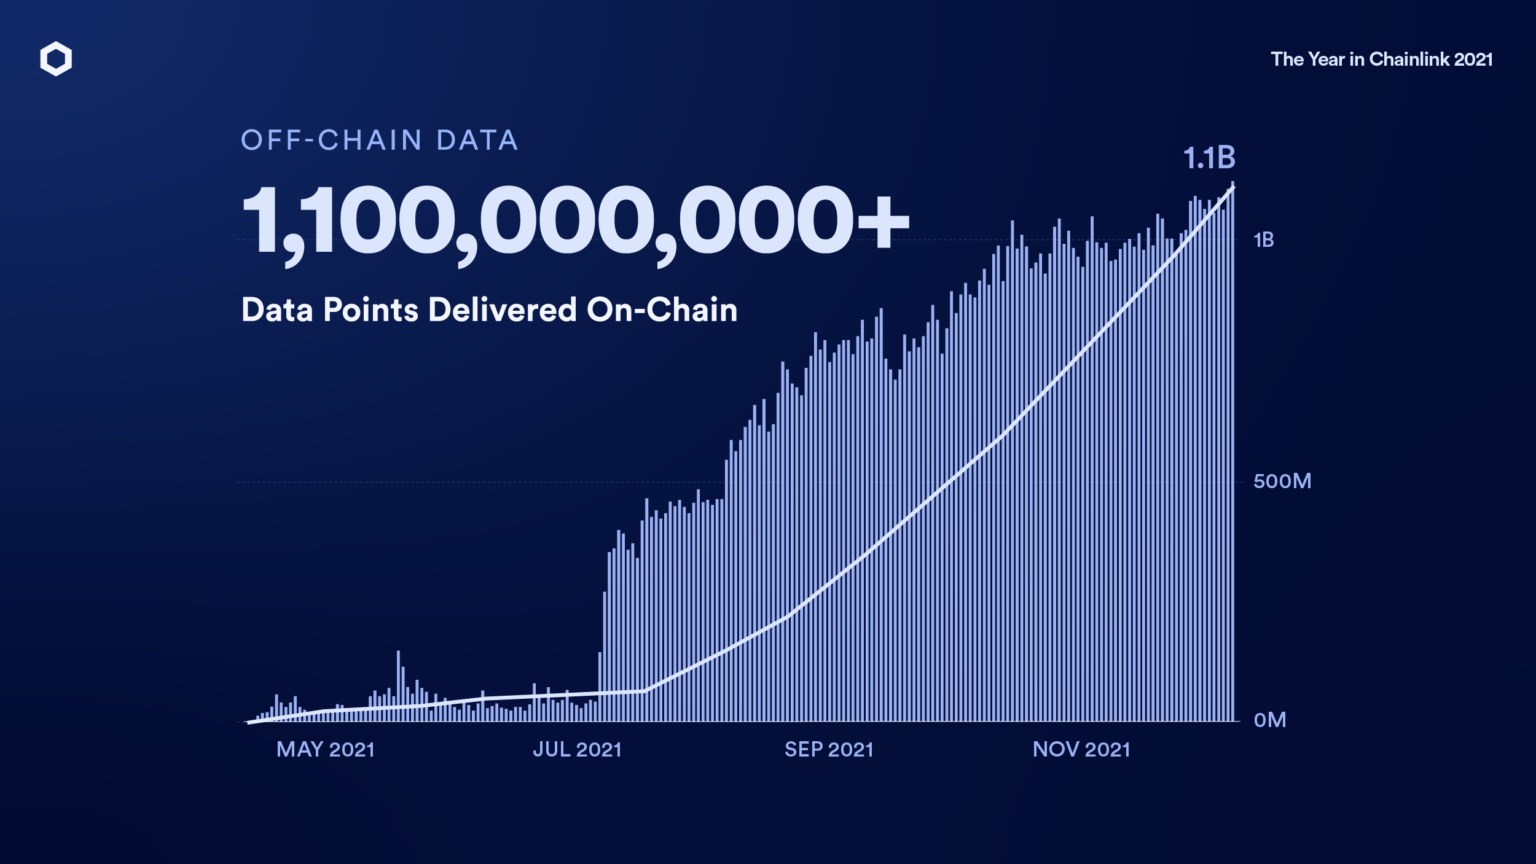 Main driver of Chainlink's exponential growth (LINK)